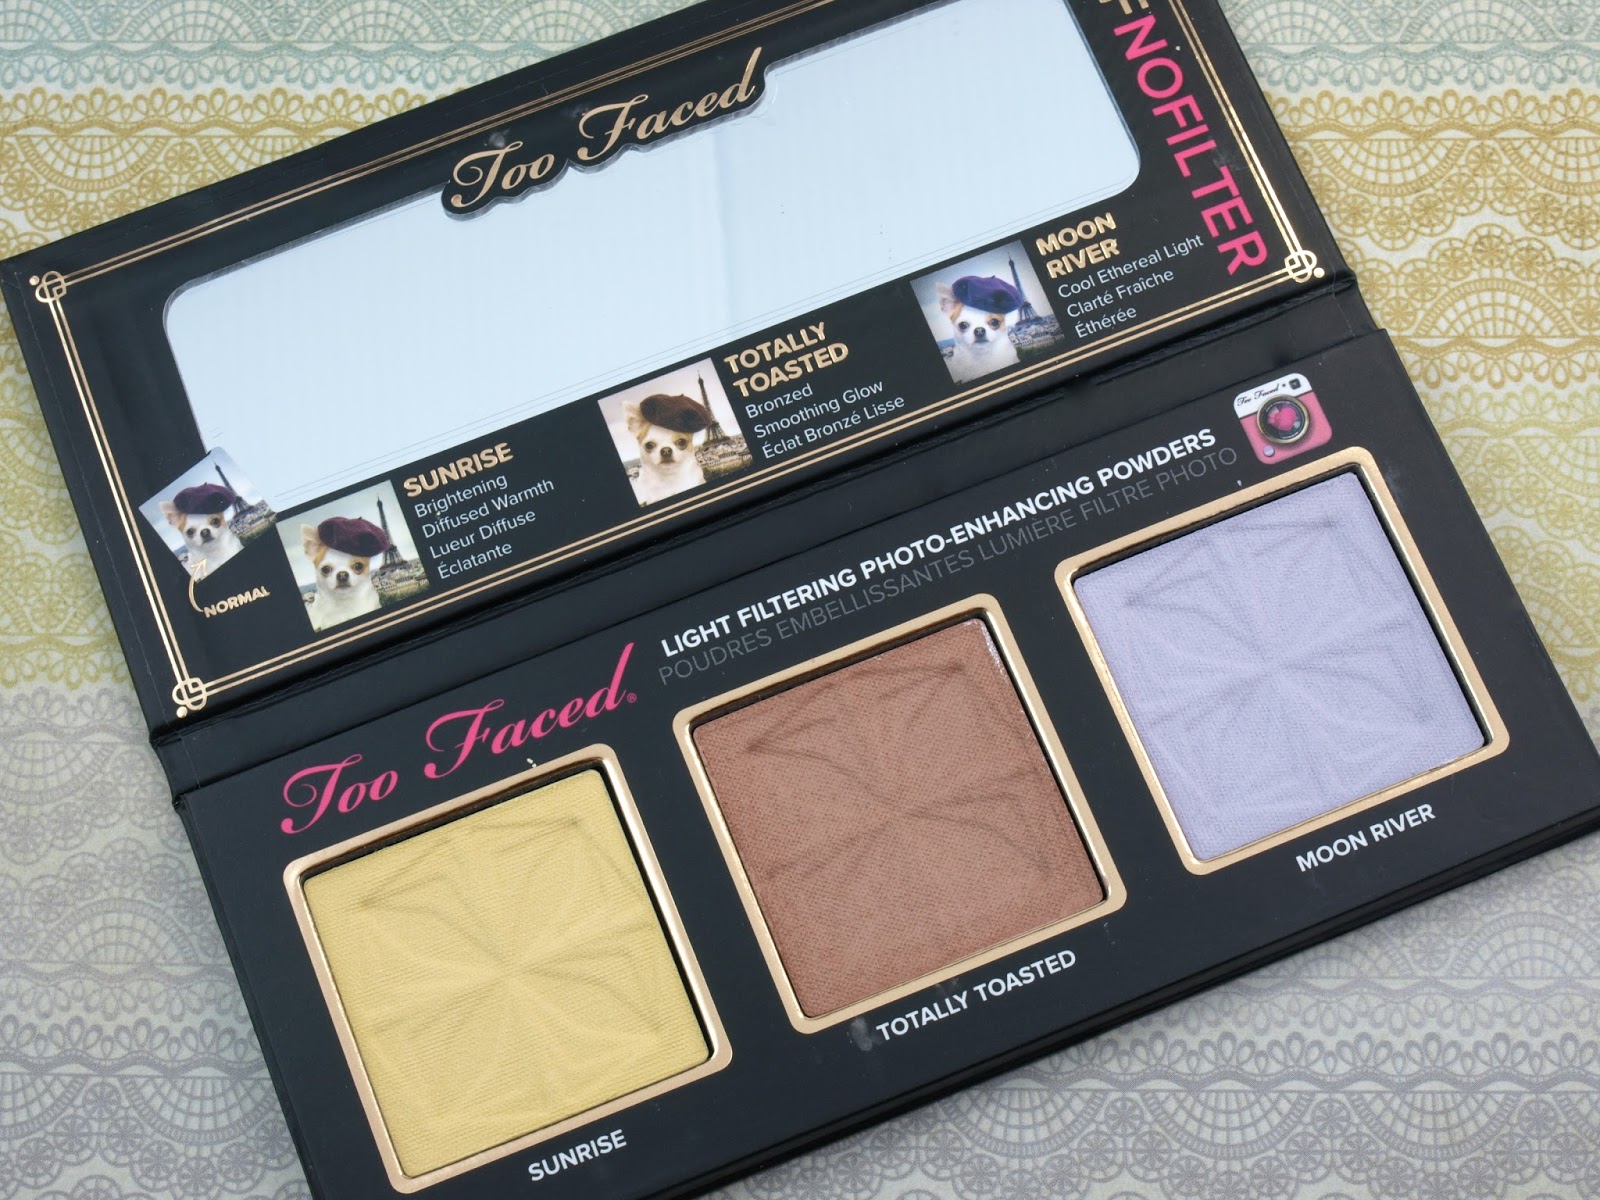 Too Faced #TFNofilter Selfie Powders Light Filtering Photo-Enhancing Powders: Review and Swatches